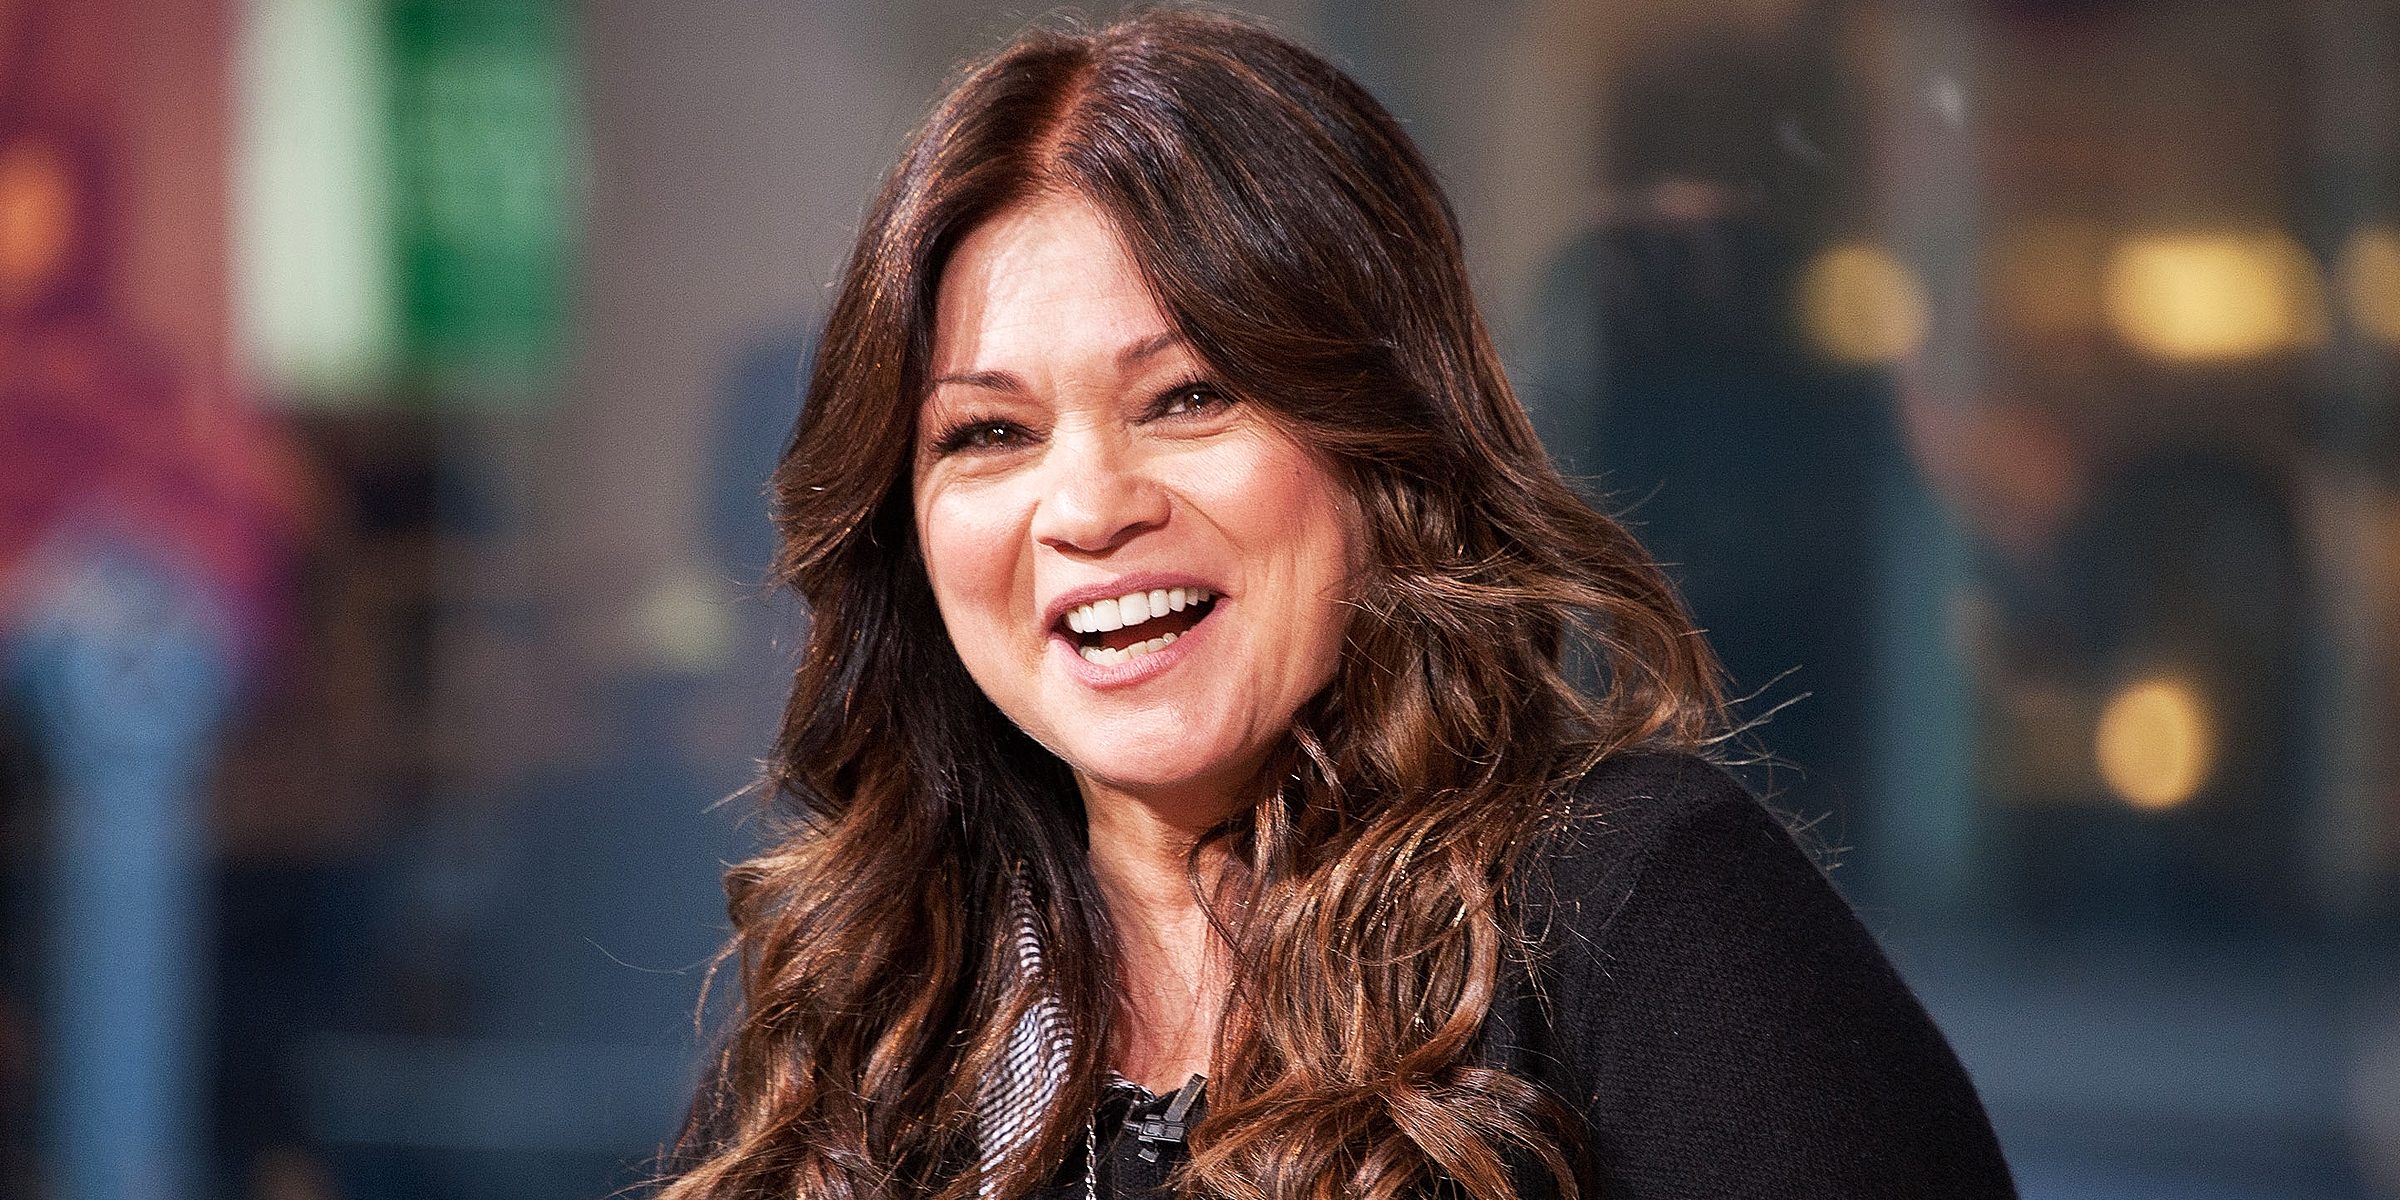 Valerie Bertinelli on November 4, 2015 in New York City | Source: Getty Images